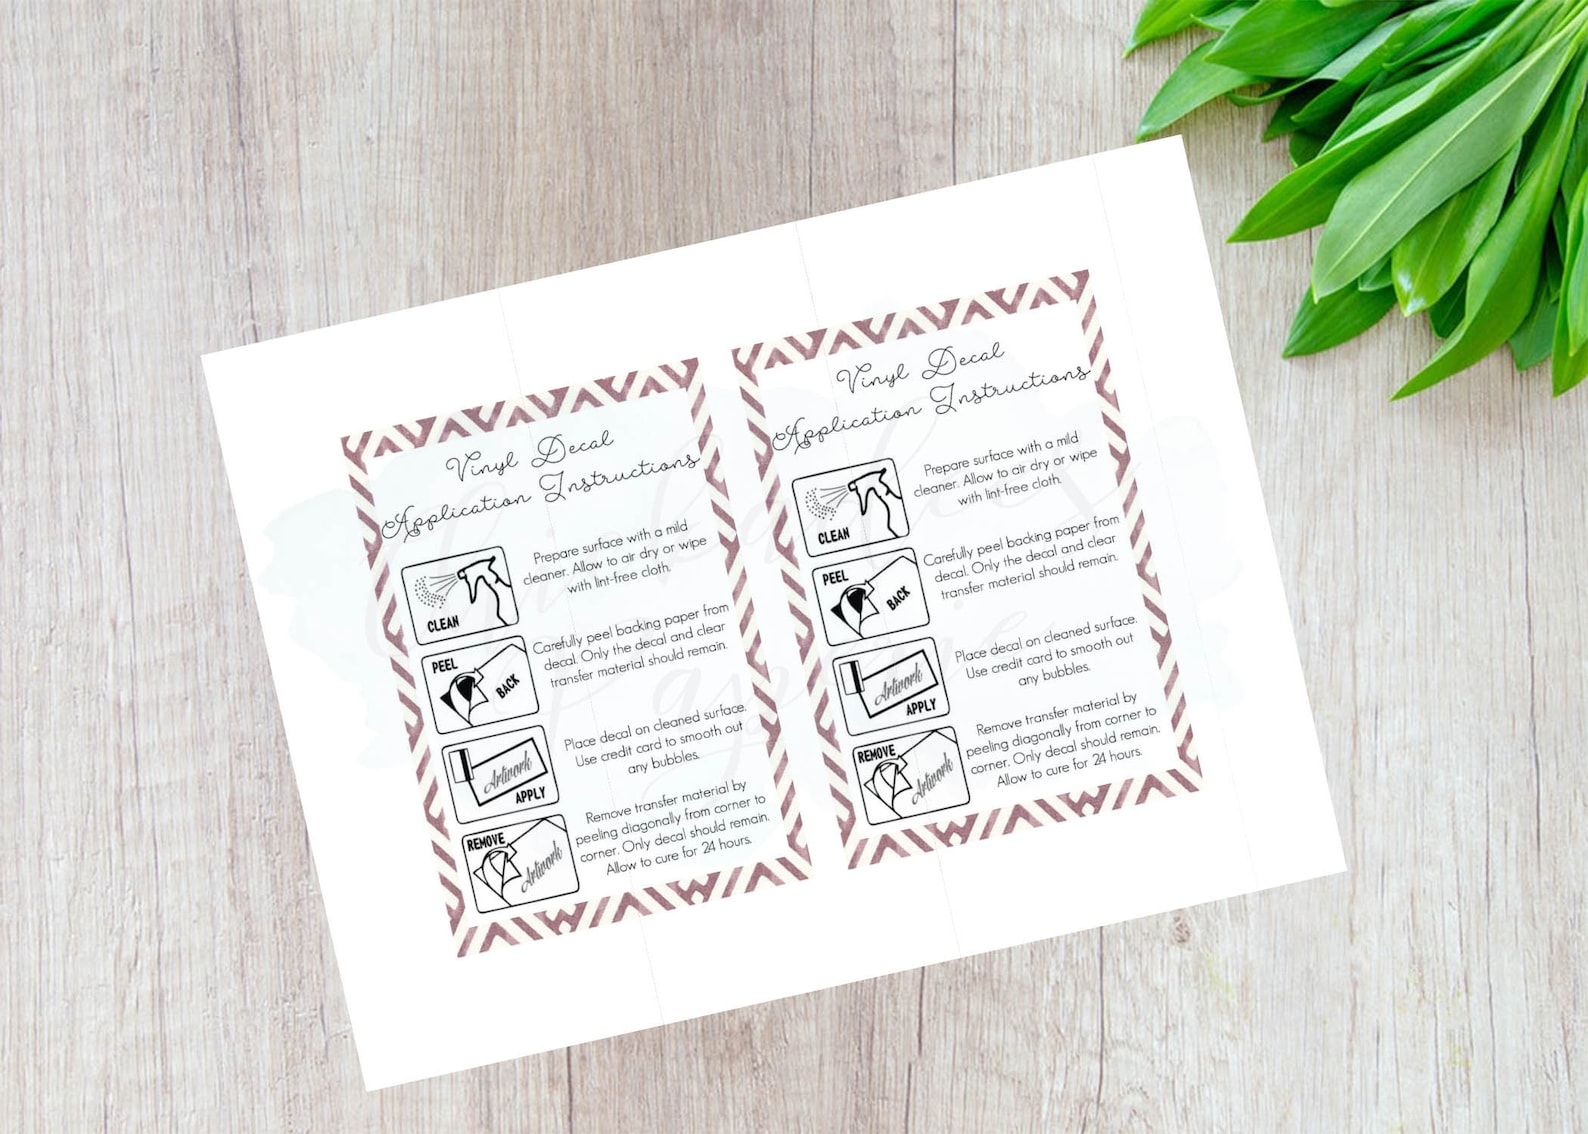 decal-application-instructions-printable-vinyl-care-card-how-etsy